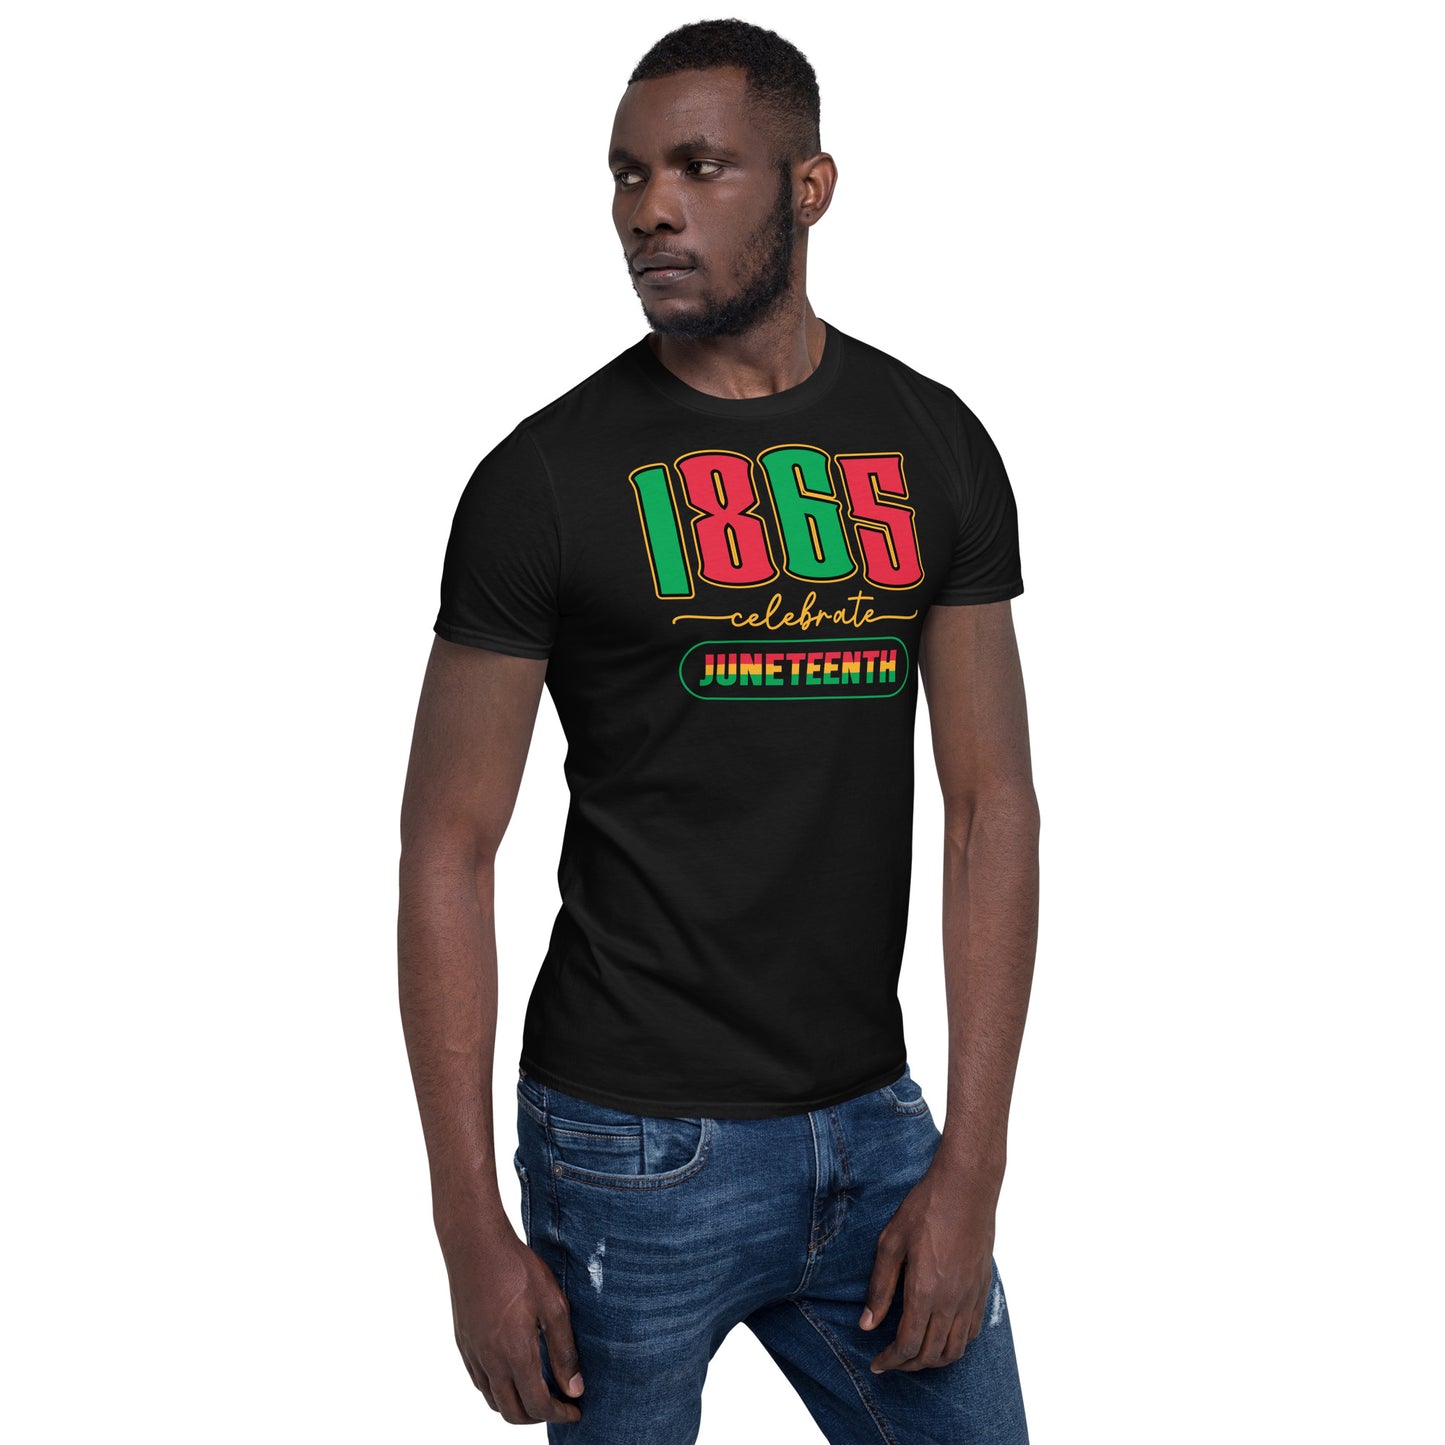 a man wearing a black shirt with the words 1865 celebrating juneteenth